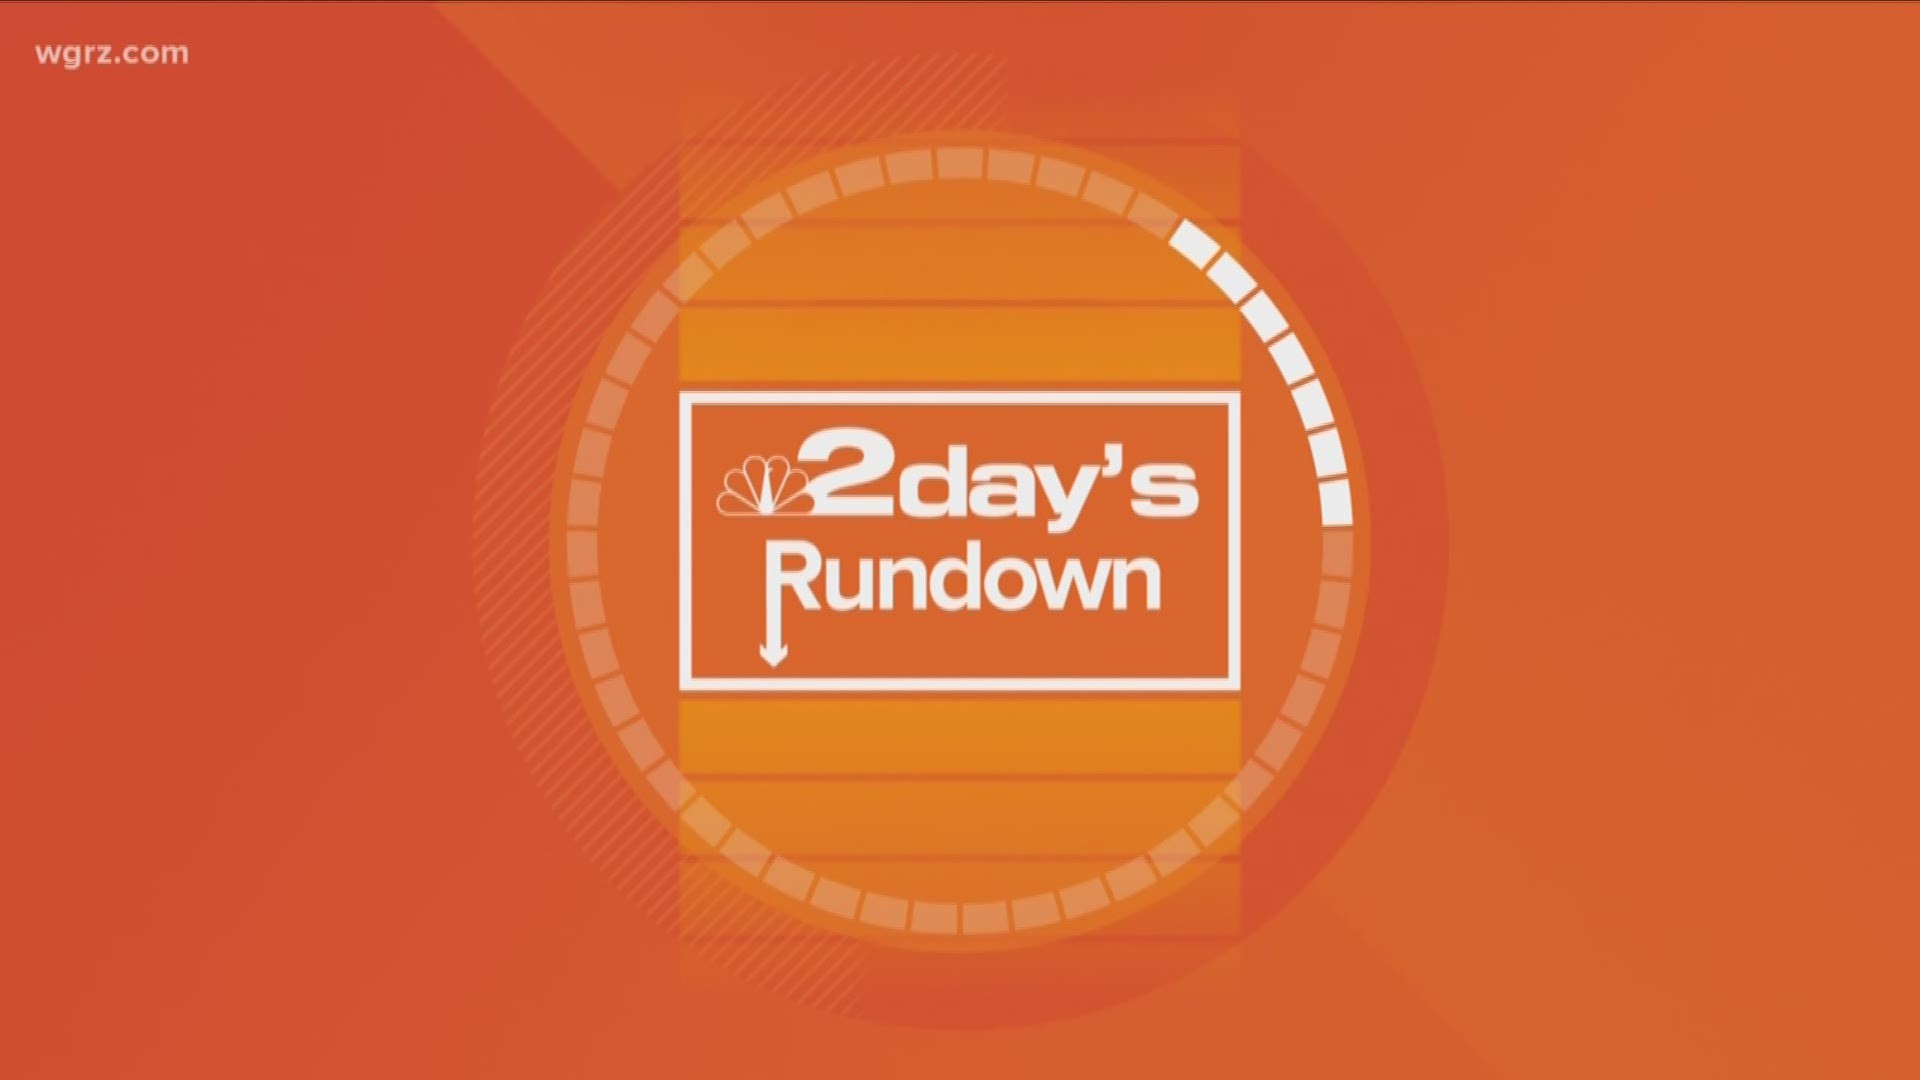 2day's Rundown: 2 year-old found safe in stolen vehicle, heavy flooding in parts of NYS and who will republicans pick to replace Chris Collins?  That and more in 2day's rundown